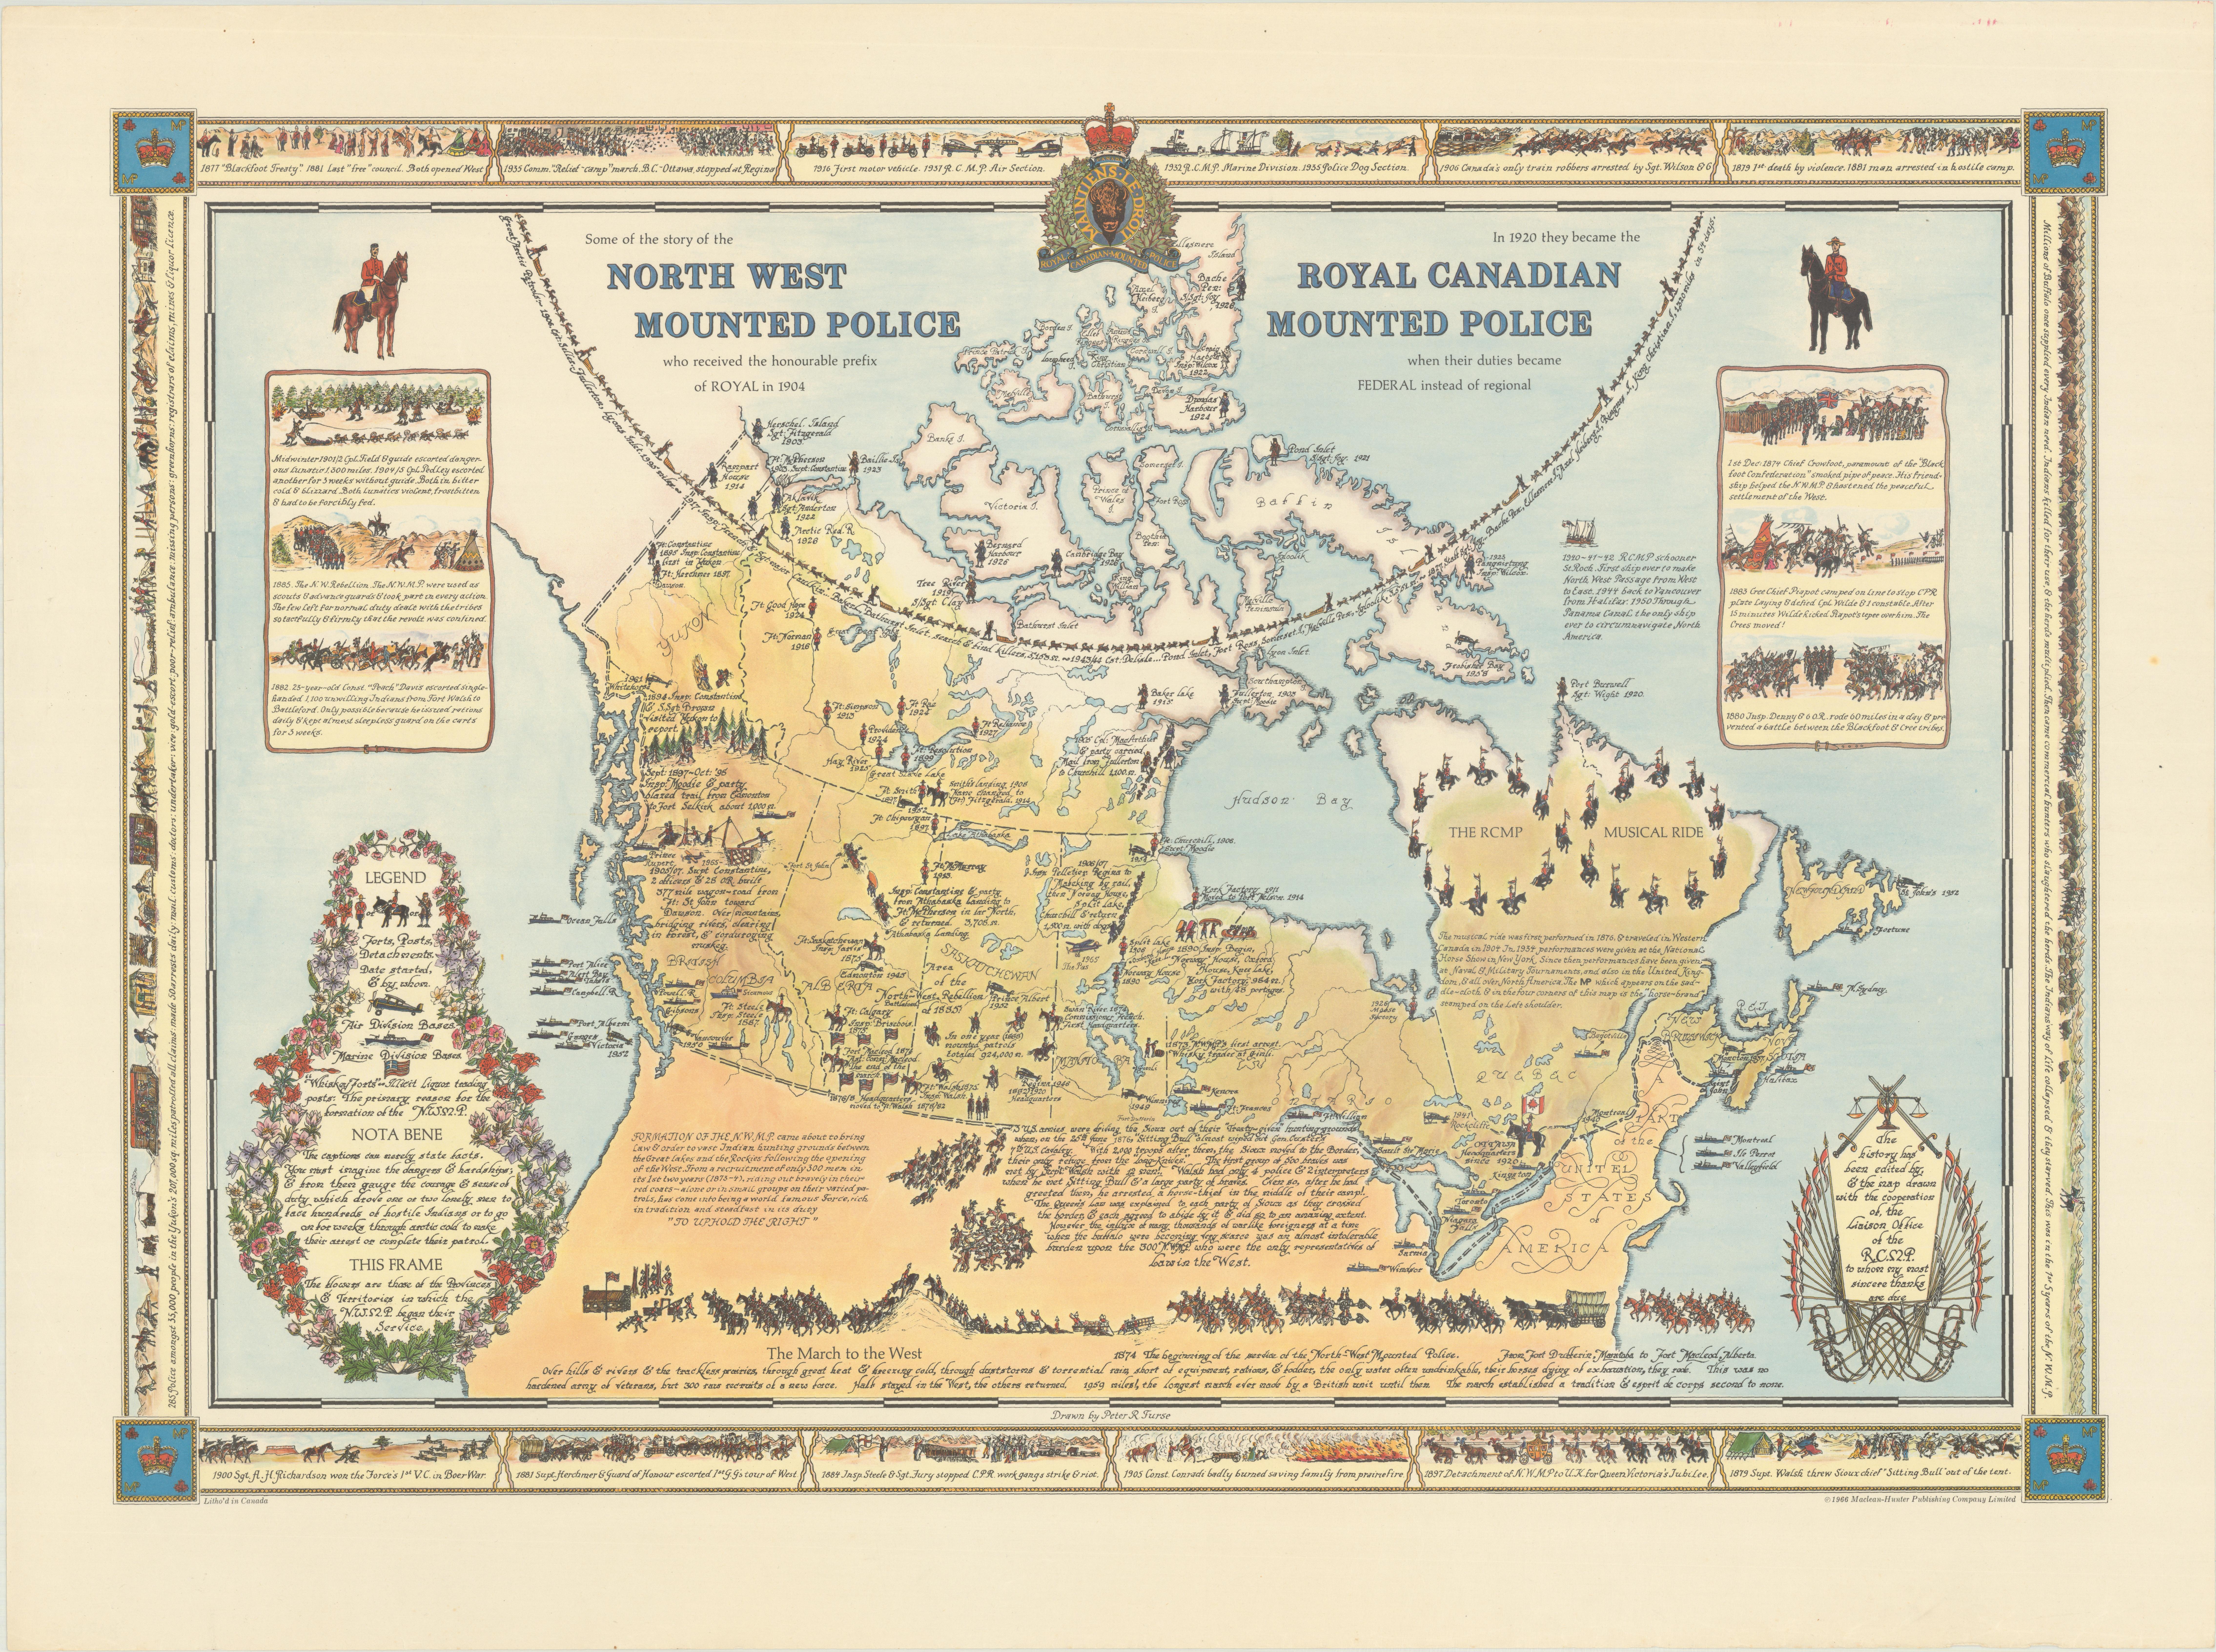 This rare pictorial map by Peter R. Furse celebrates the history of the Royal Canadian Mounted Police. It was produced with the cooperation of the RCMP, as acknowledged in an elegant cartouche at bottom right. The landscape is filled with charming